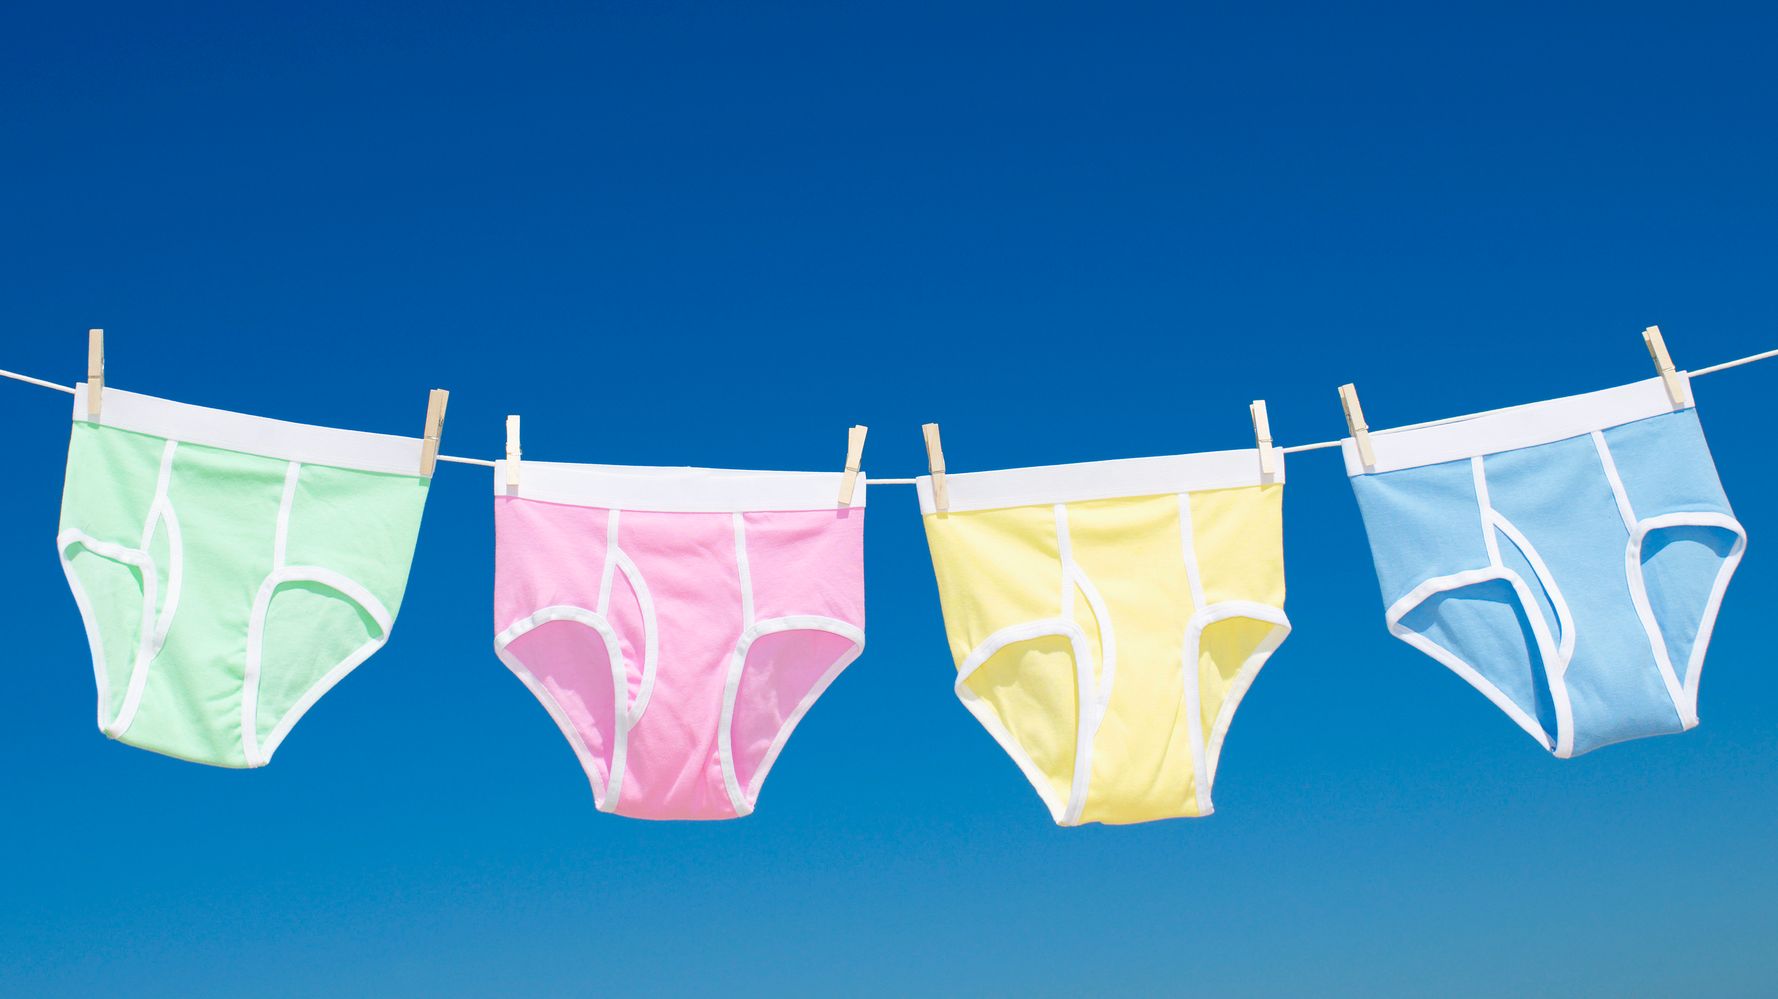 How Often Should You Buy New Underwear & Replace Old?